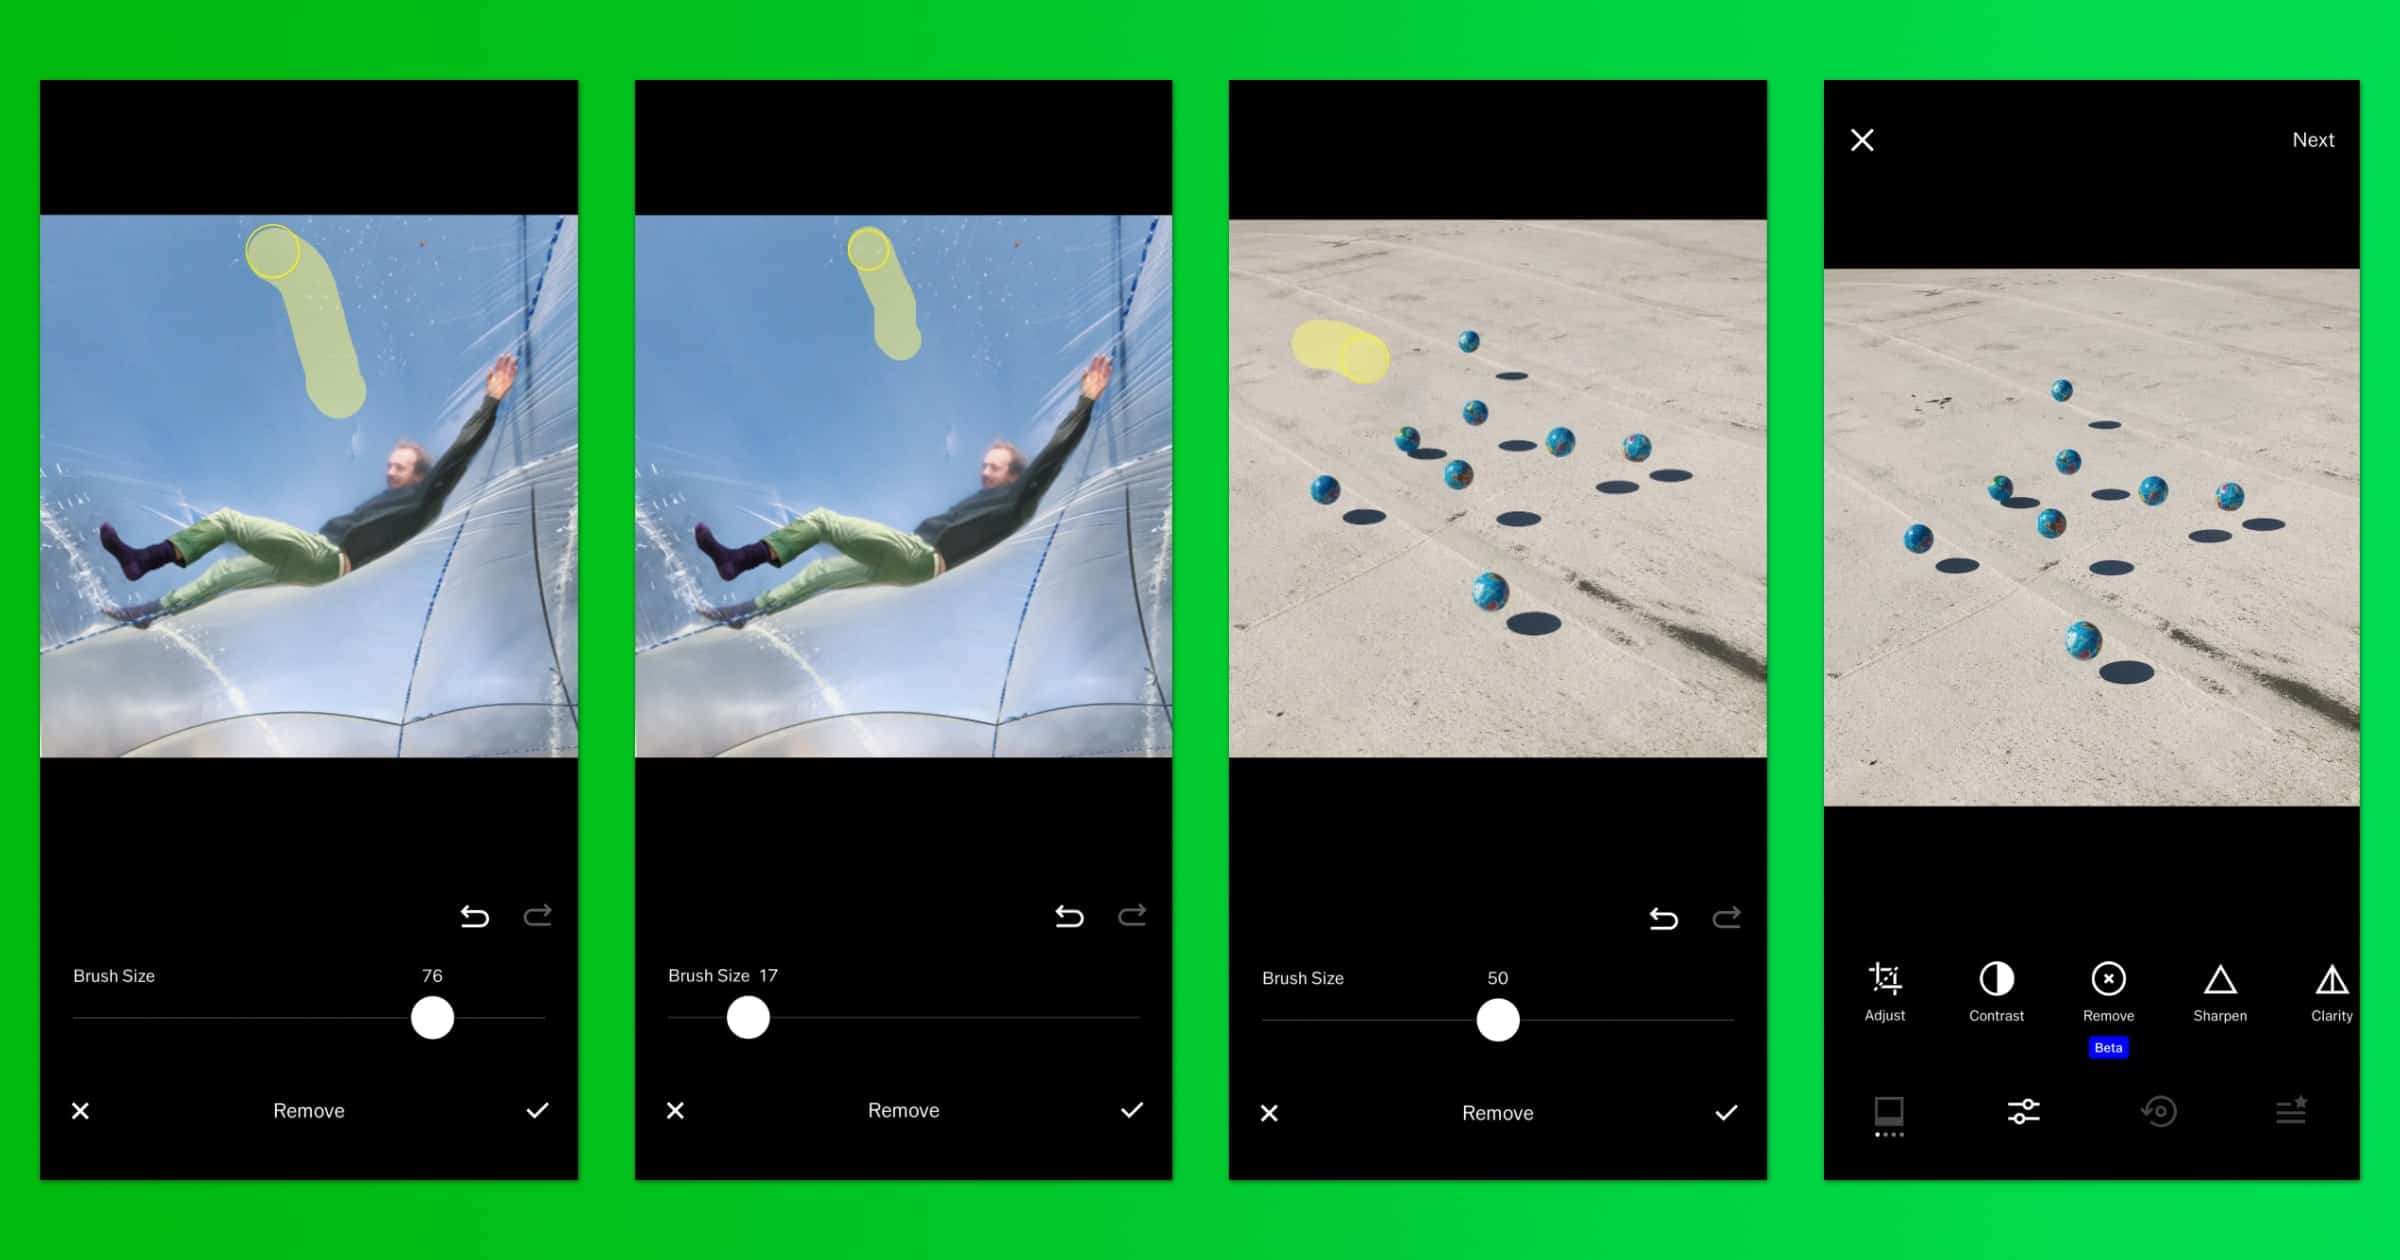 VSCO Introduces a Healing Tool for Members Called ‘Remove’